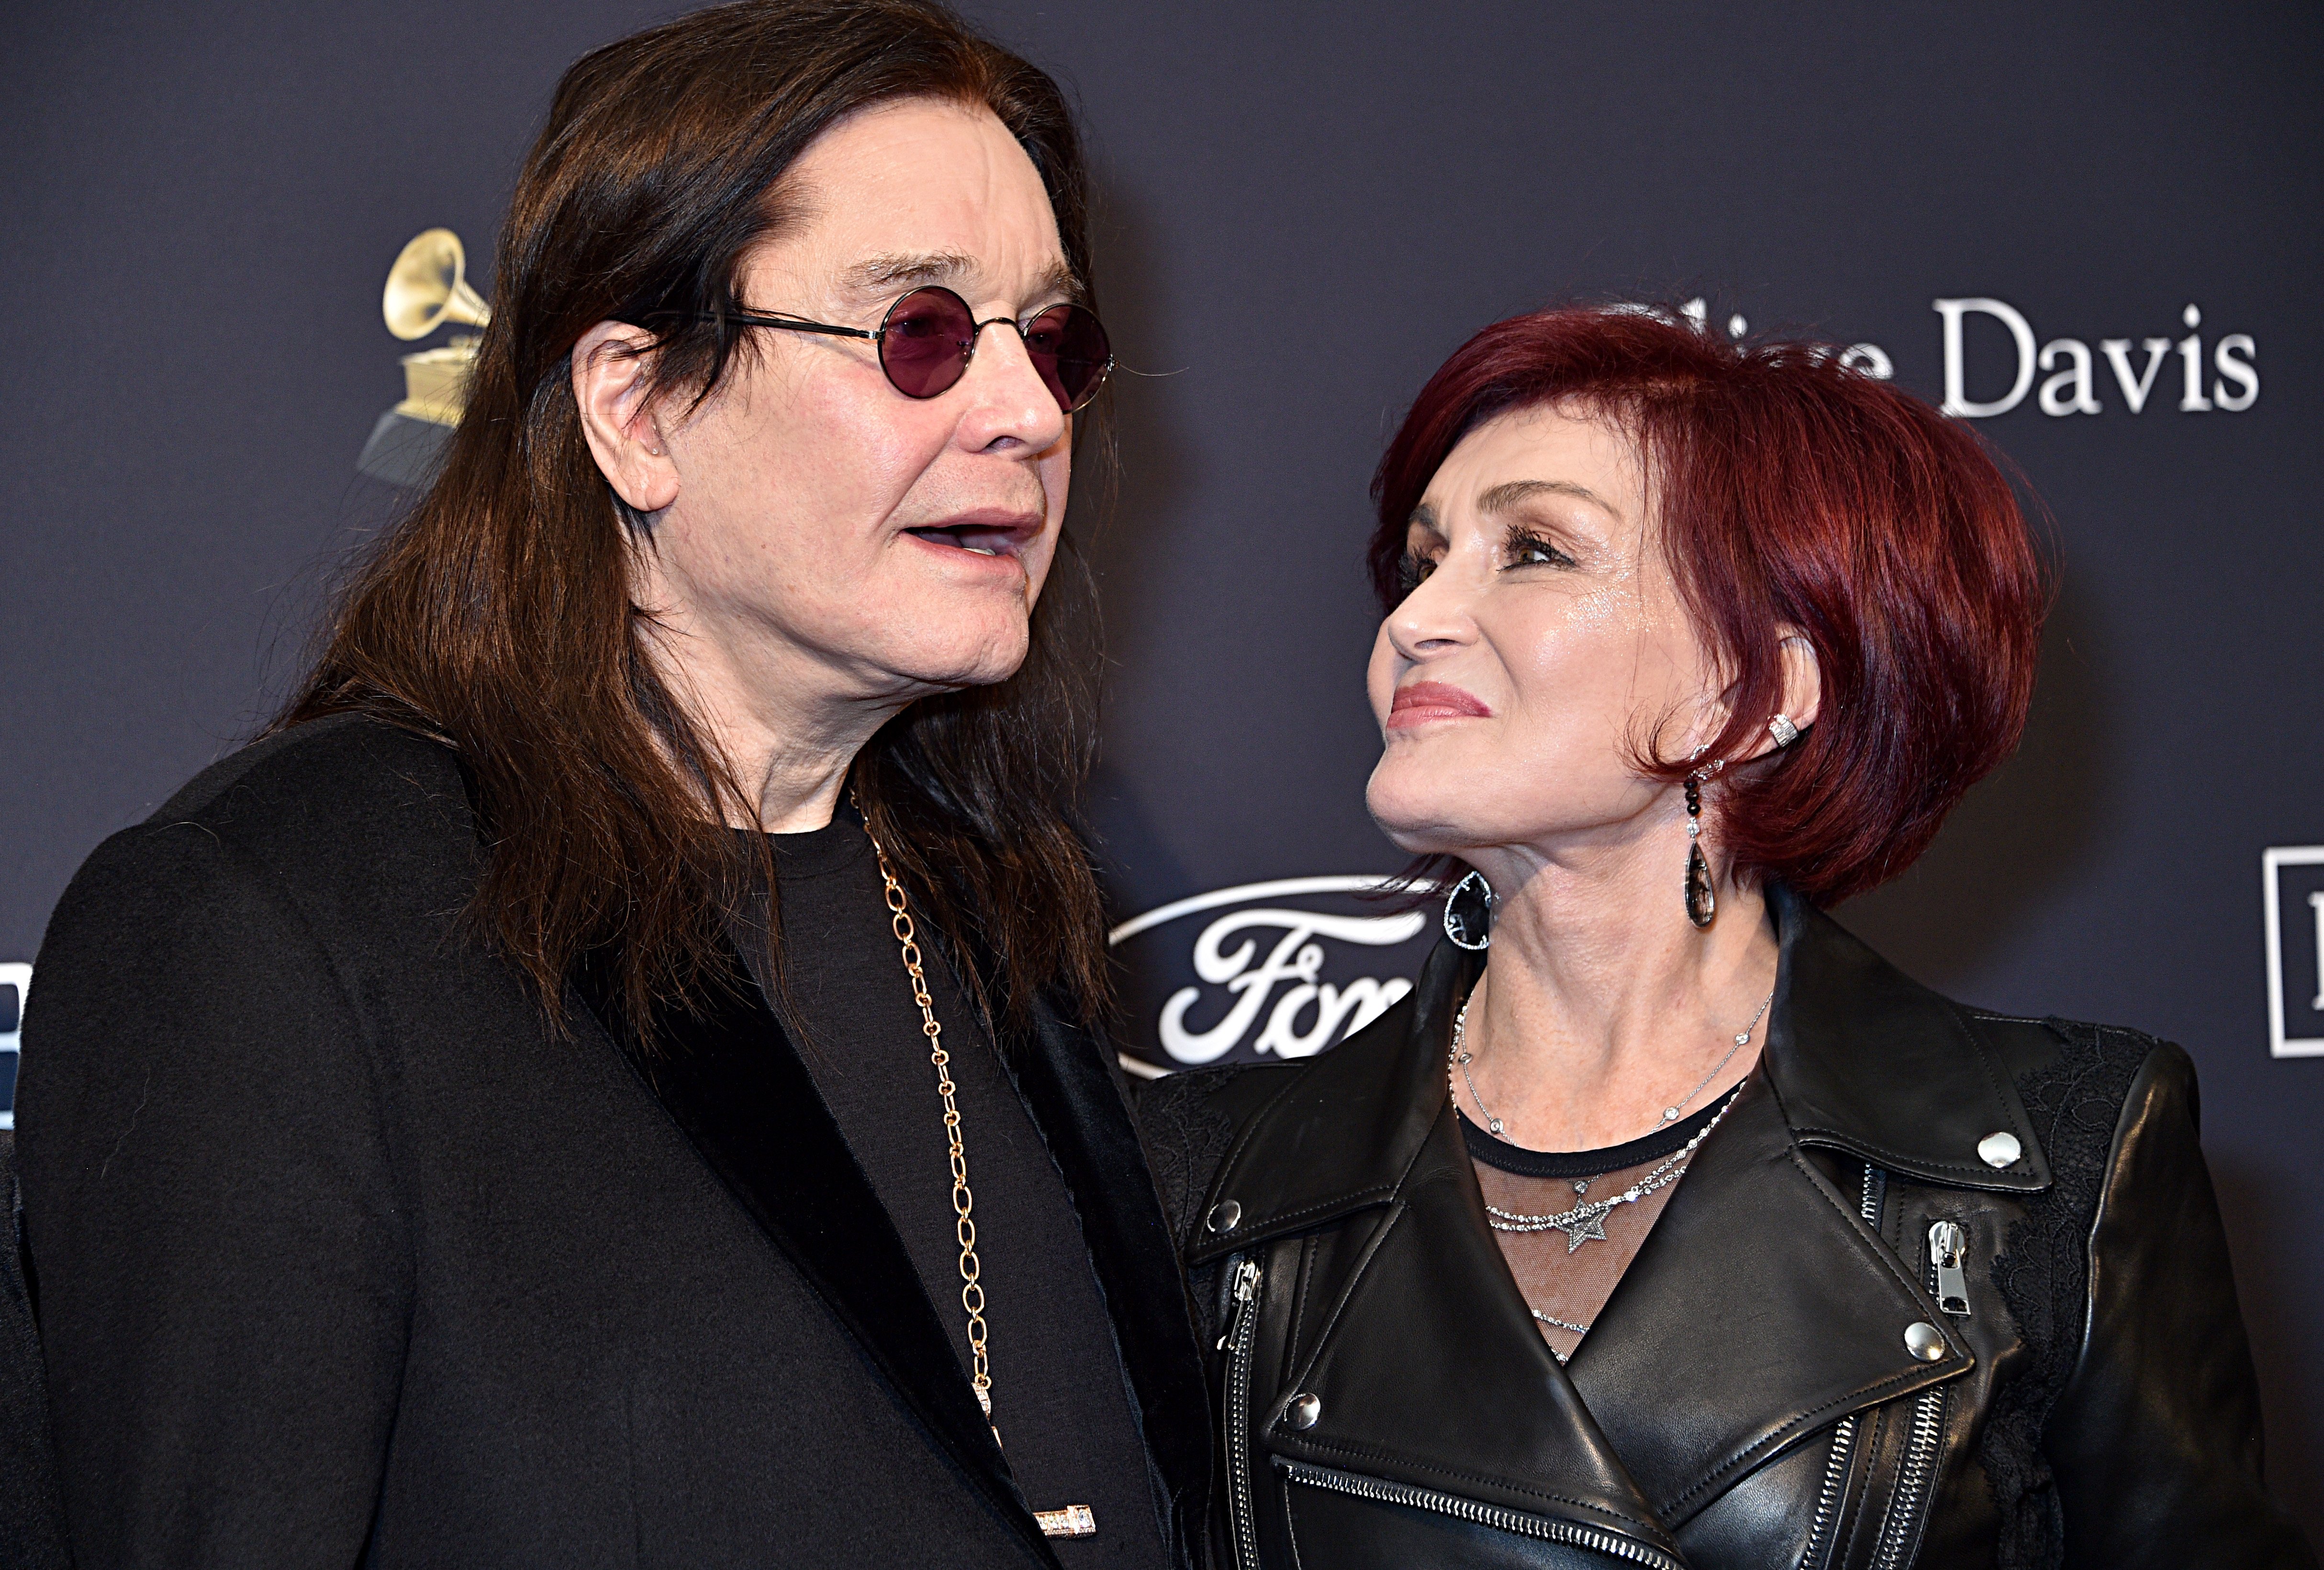 Ozzy Osbourne and Sharon Osbourne at the Pre-Grammy Gala and Grammy Salute to Industry Icons Honoring Sean "Diddy" Combs on January 25, 2020 in Beverly Hills, California | Source: Getty Images